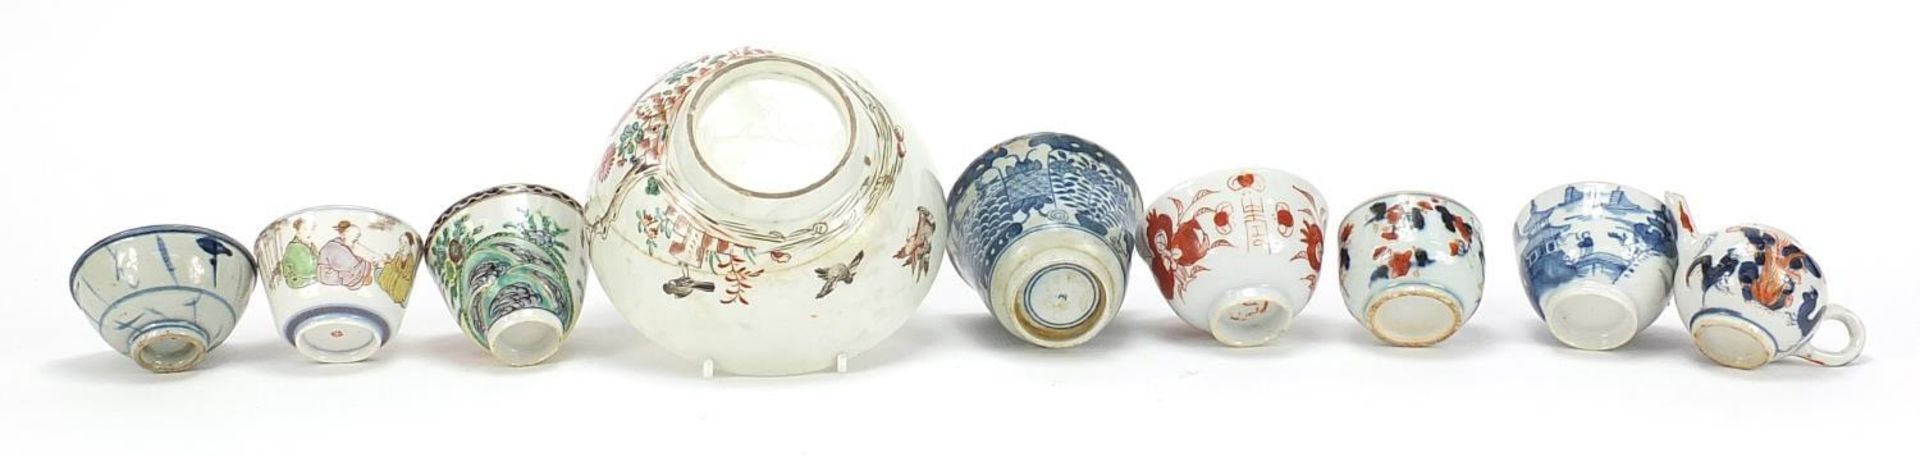 Chinese and European ceramics including tea bowls and Imari palette teapot, the largest 15.5cm in - Image 8 of 9